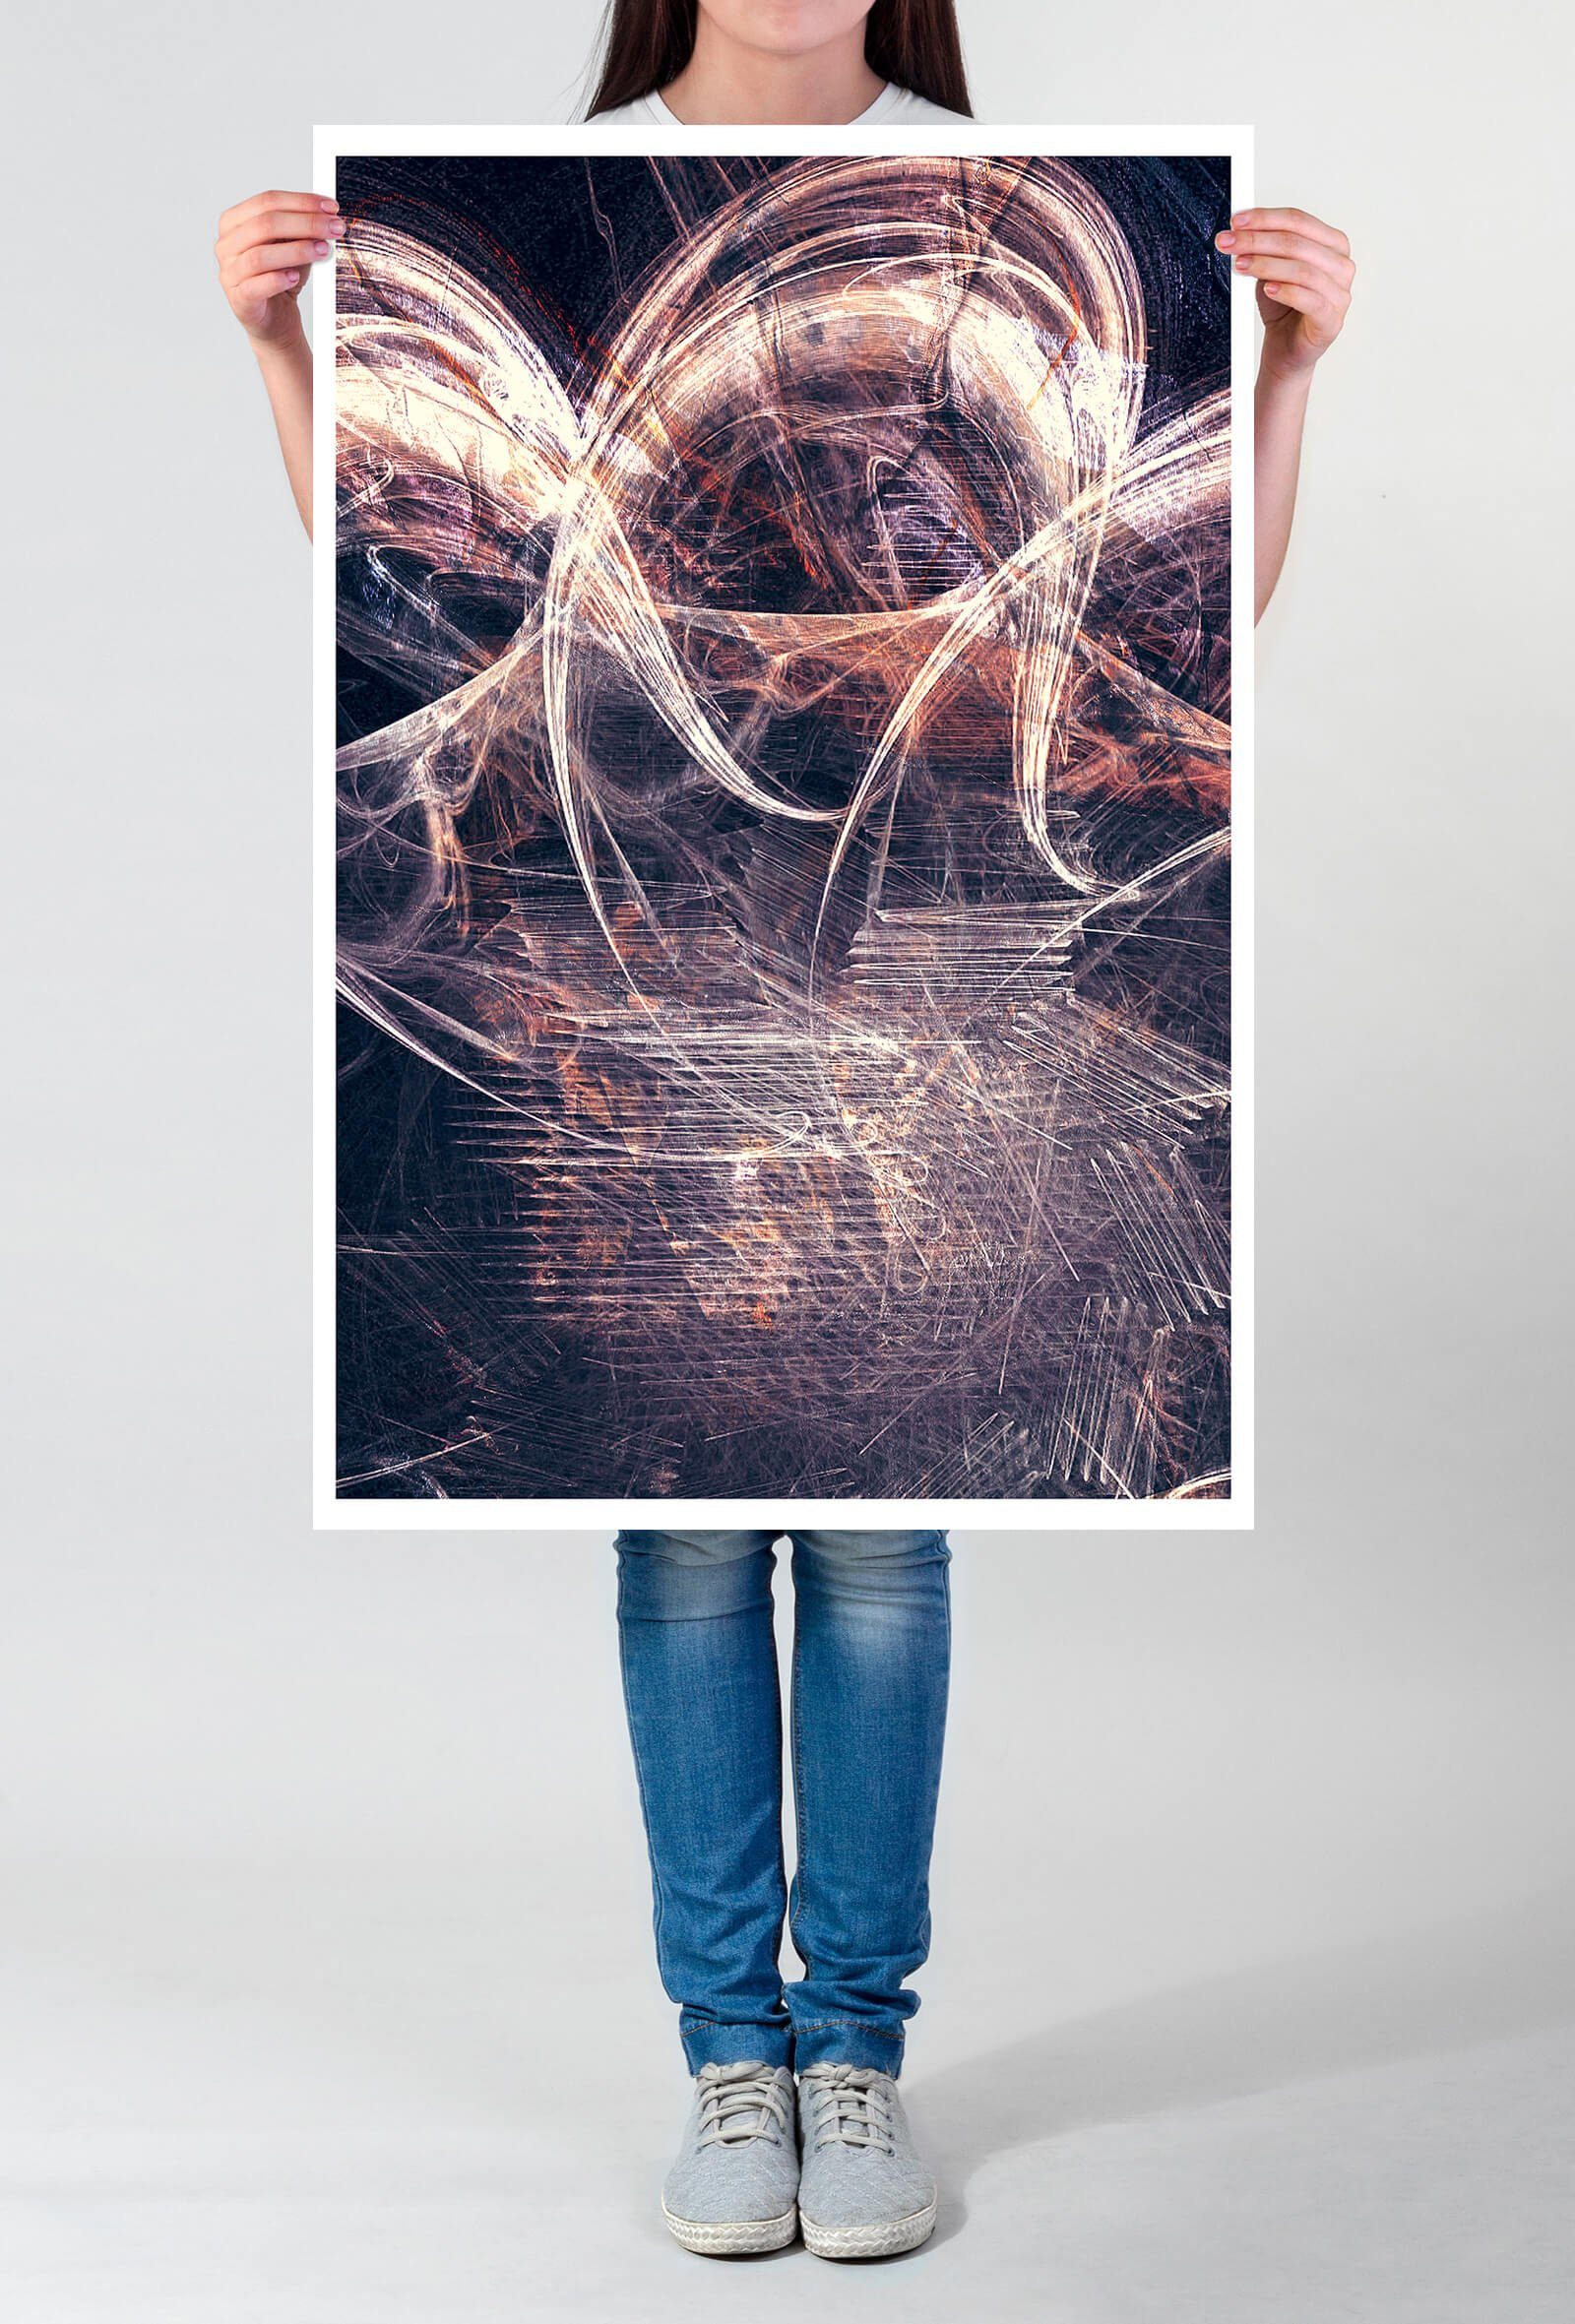 Sinus Art Poster I Don't Wanna Go On With You Like That - 60x90cm Poster